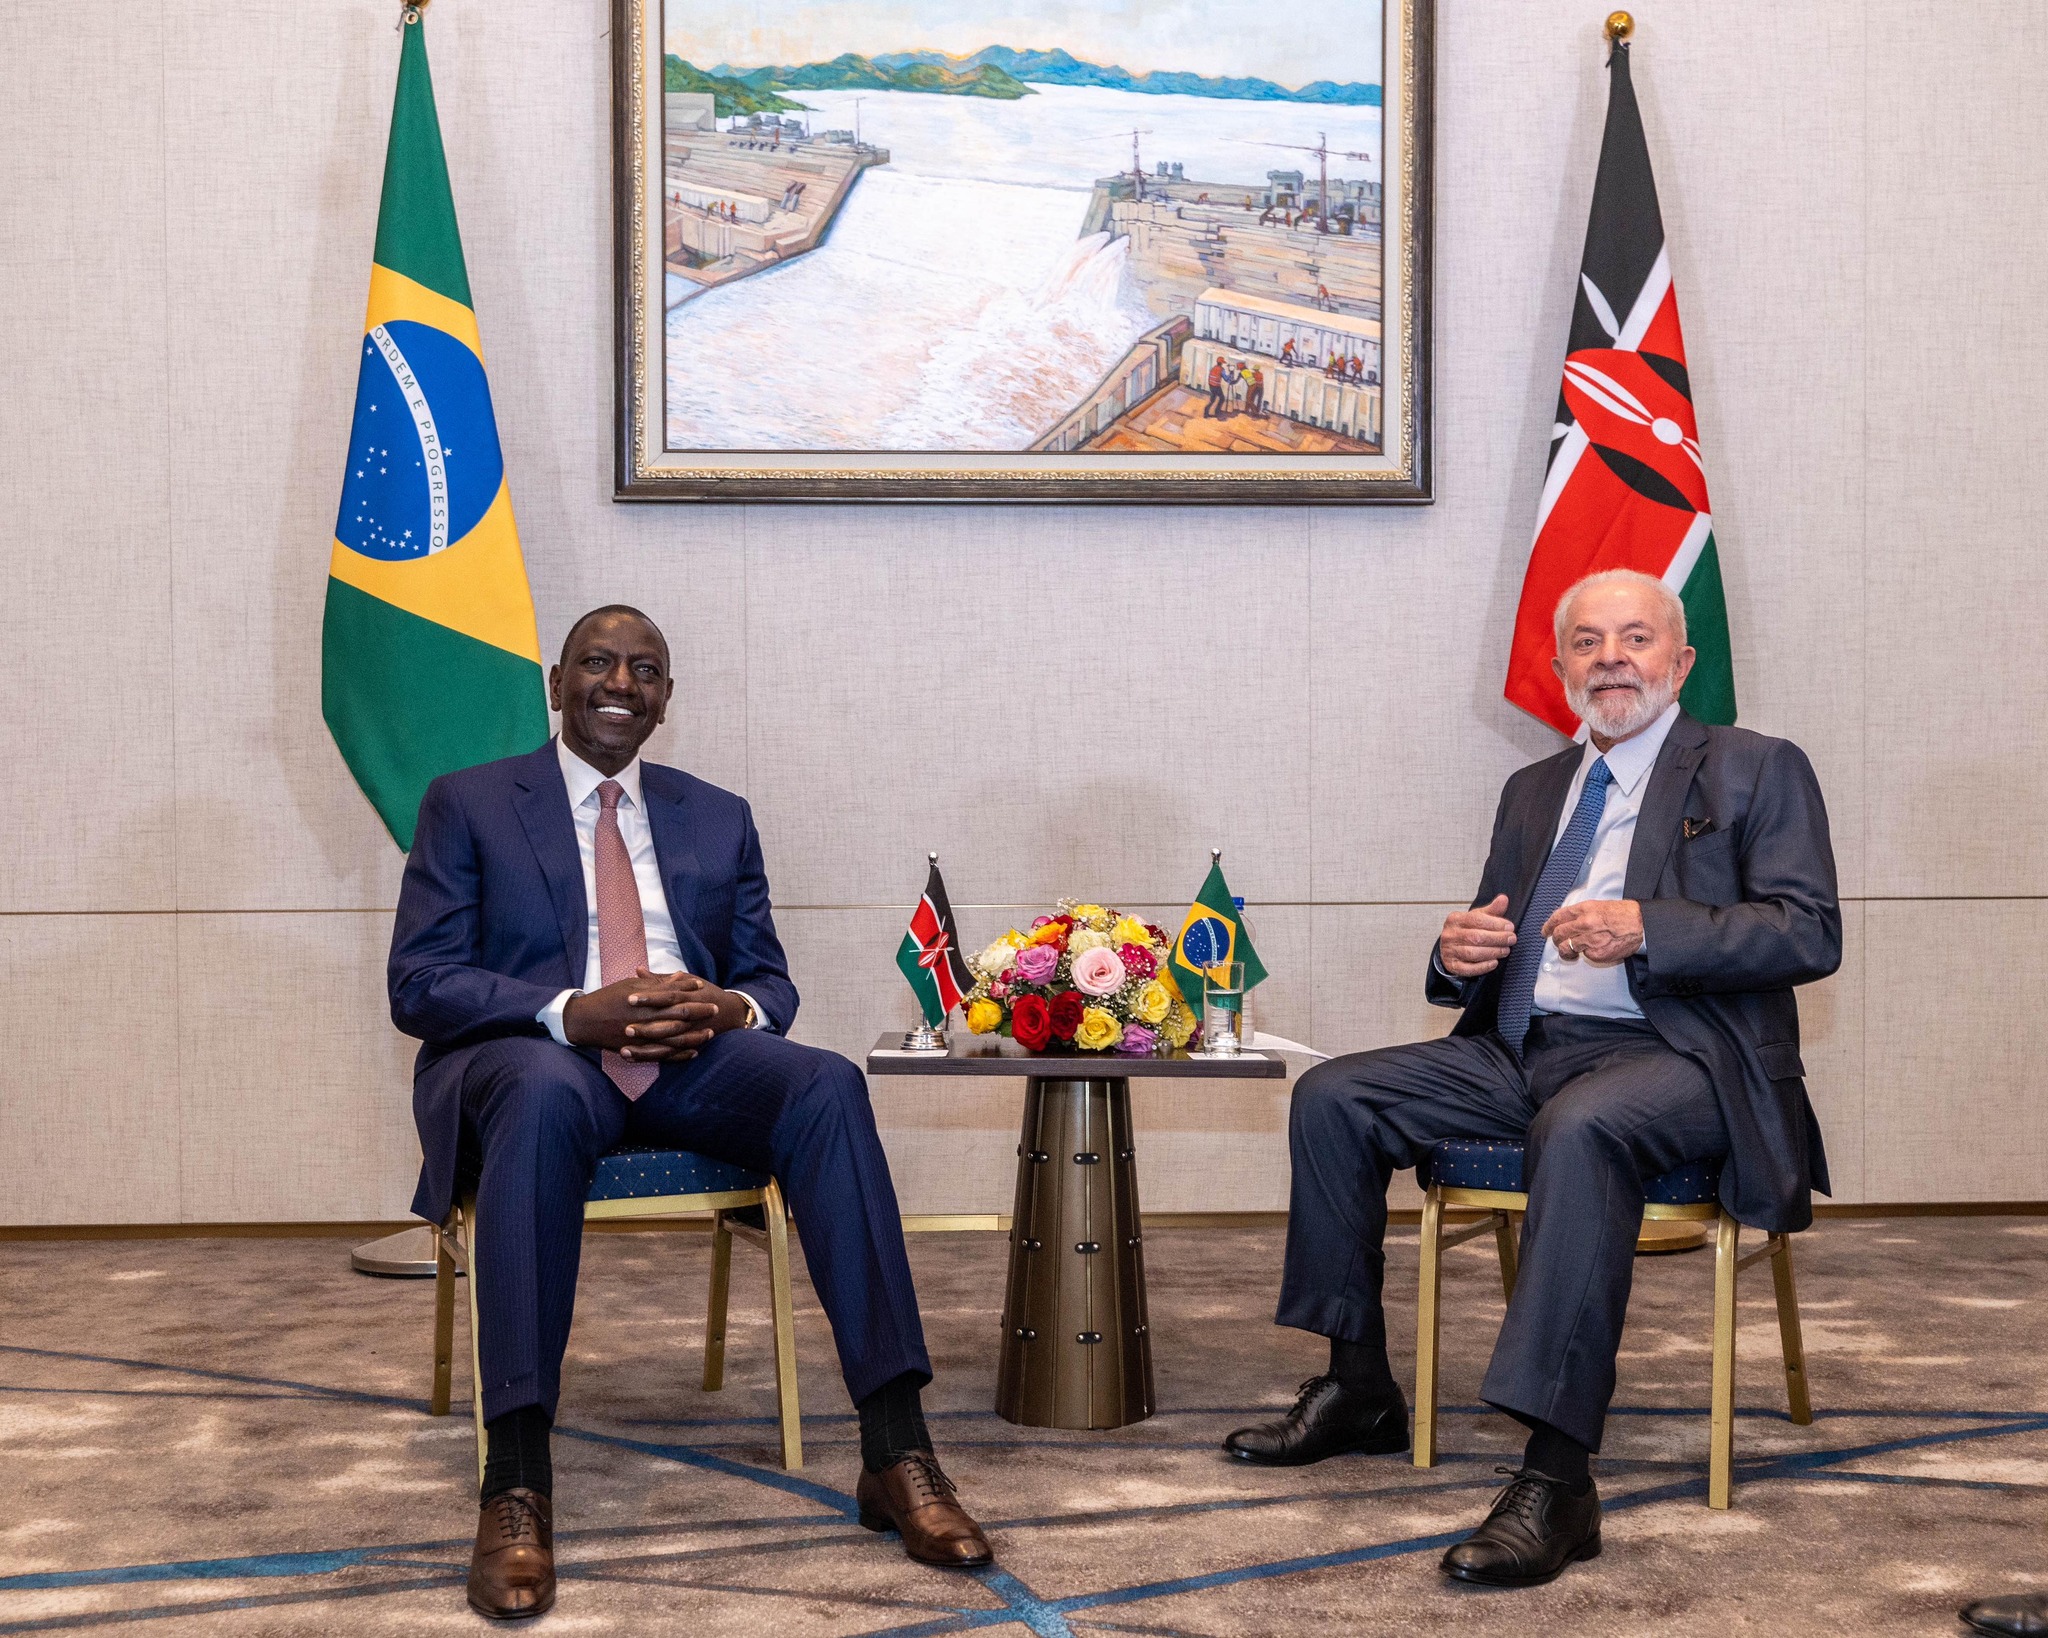 President Ruto Commits to Strengthening Ties with Brazil